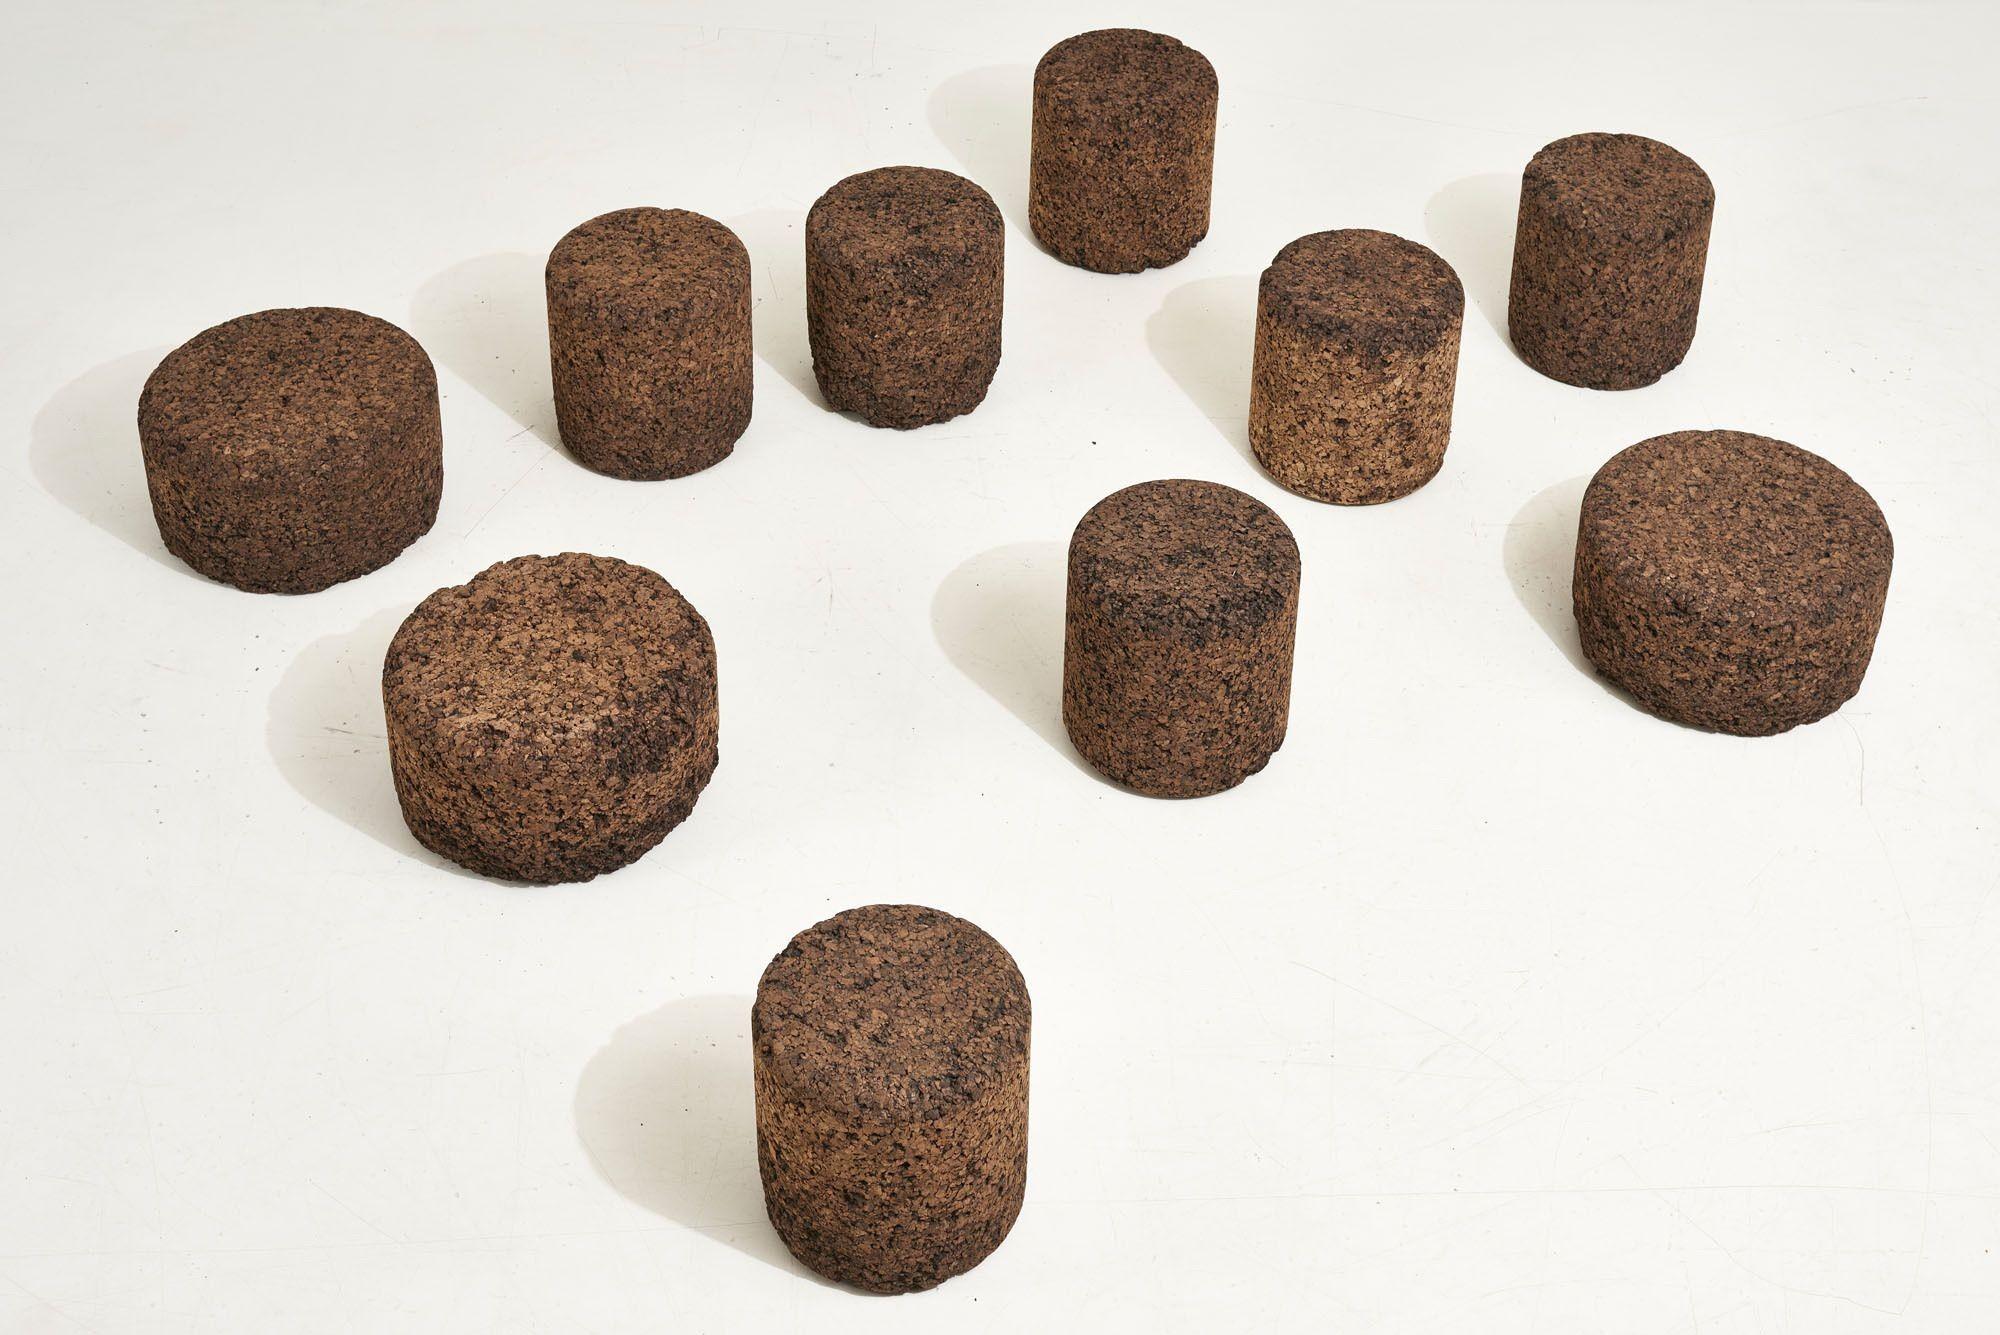 WE HAVE 1 SMALL STOOL LEFT. Jasper Morrison Set of 10 Cork Stools by Moooi, 2002. As you can see in pics there are a few stools where some small areas of cork has come off. 7 stools measure 13.5